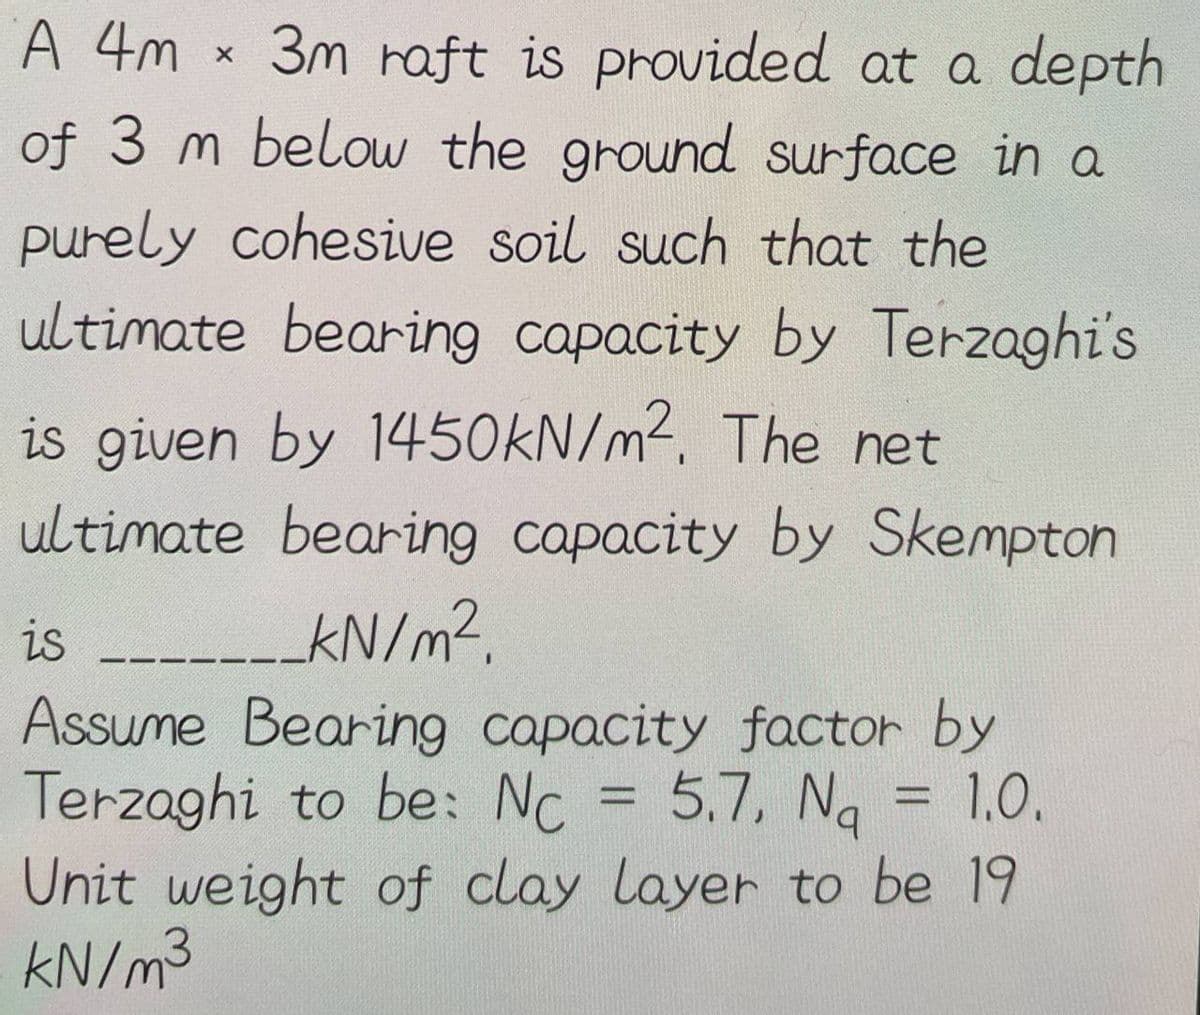 A 4m
3m raft is provided at a depth
of 3 m below the ground surface in a
purely cohesive soil such that the
ultimate bearing capacity by Terzaghi's
X
is given by 1450kN/m². The net
ultimate bearing capacity by Skempton
_kN/m².
is______
Assume Bearing capacity factor by
Terzaghi to be: Nc = 5.7, Na
5.7, N₁ = 1.0.
Unit weight of clay layer to be 19
kN/m³